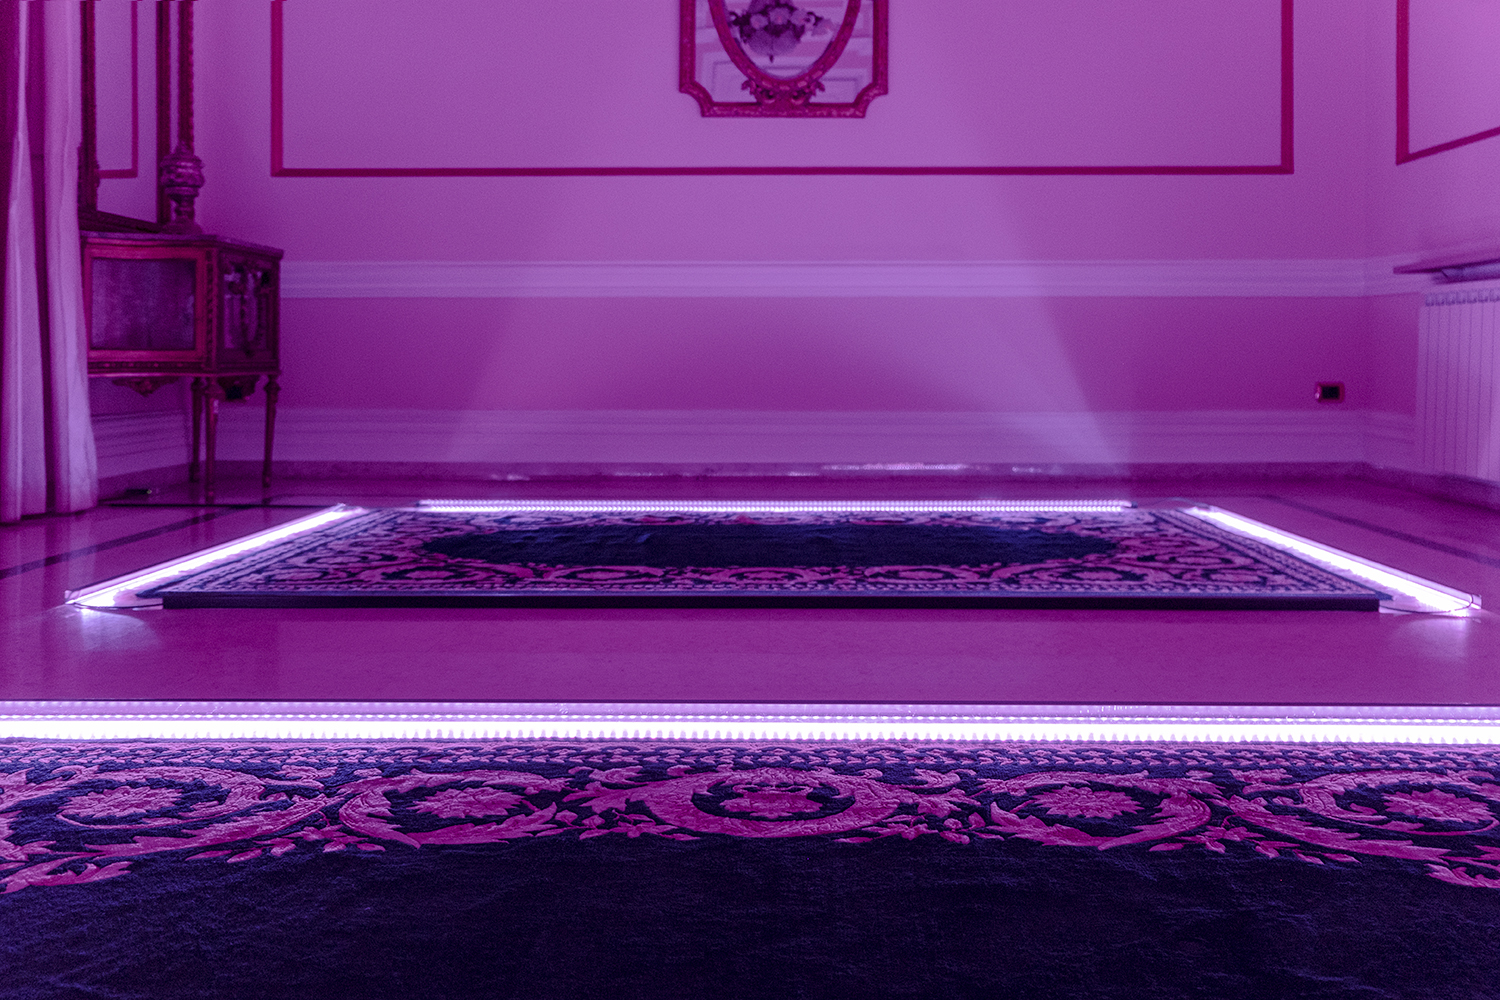 LED lights for indoor cultivation are placed along the edges of the Islamic rugs